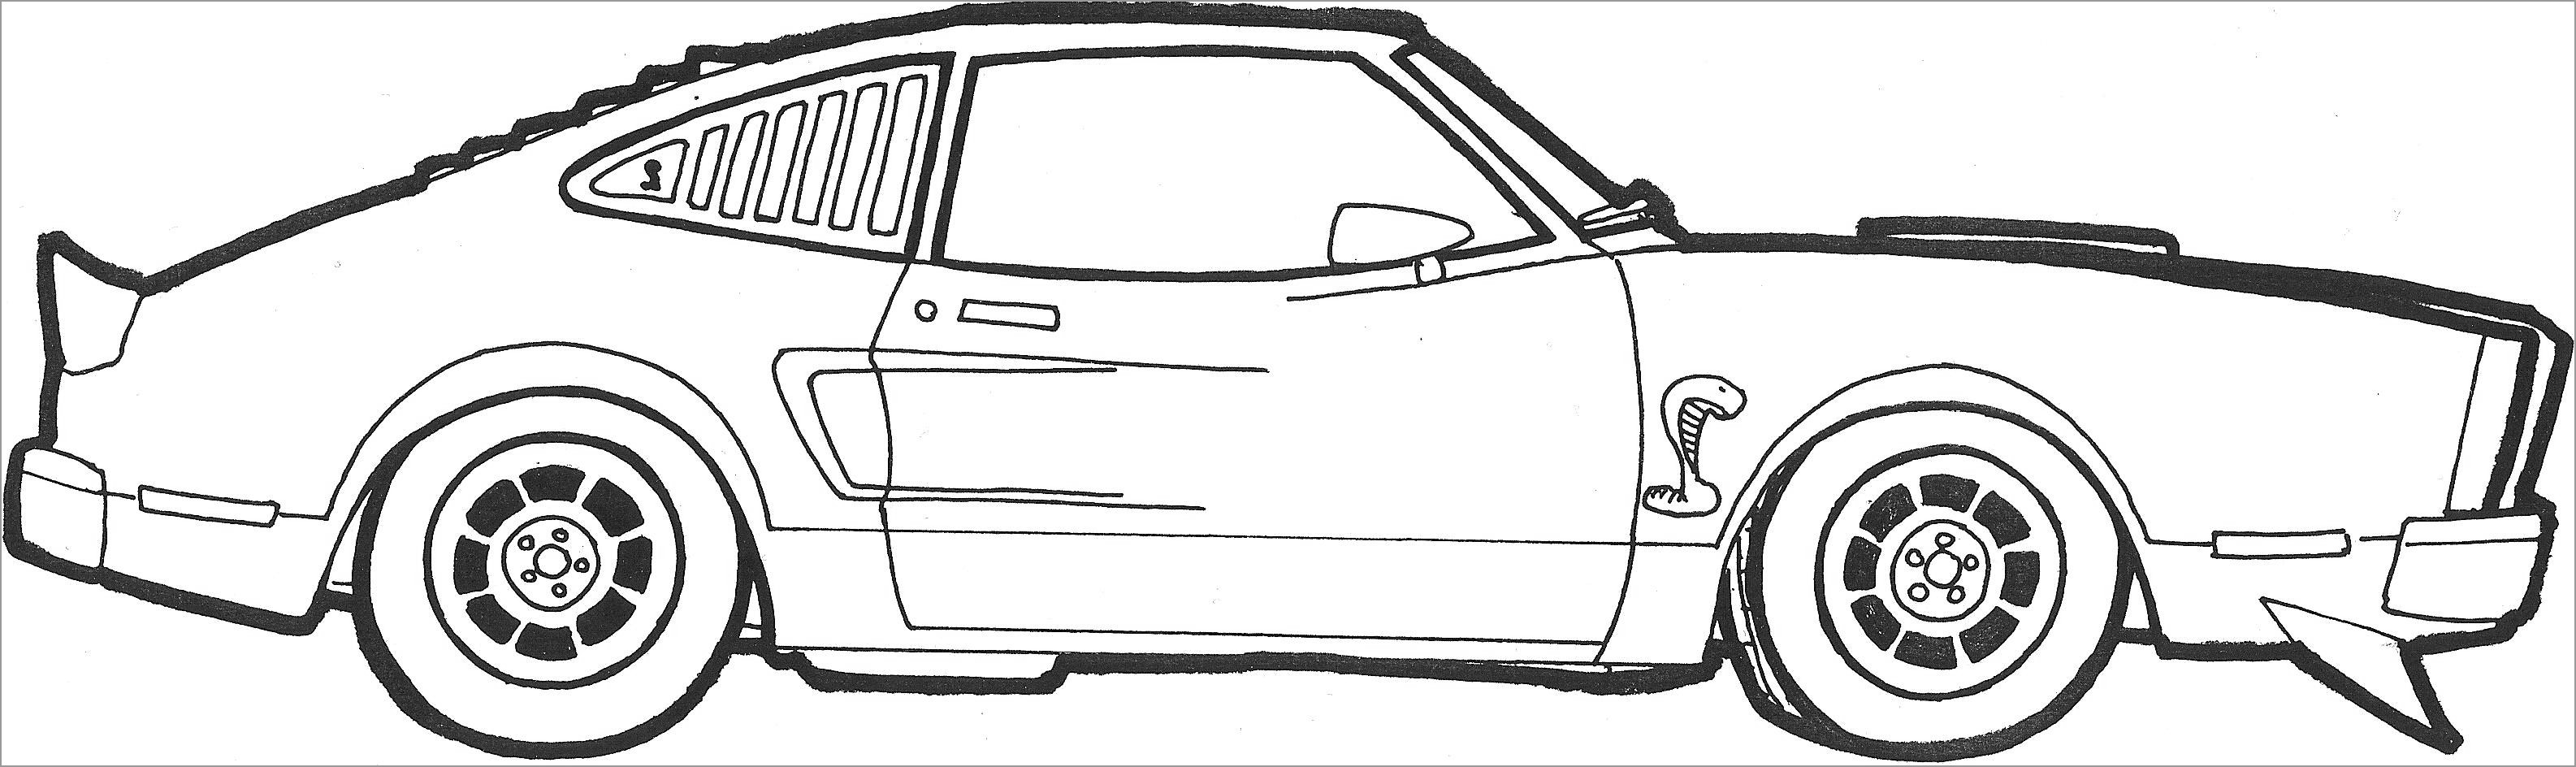 Classic Cars Coloring Pages to Print - ColoringBay